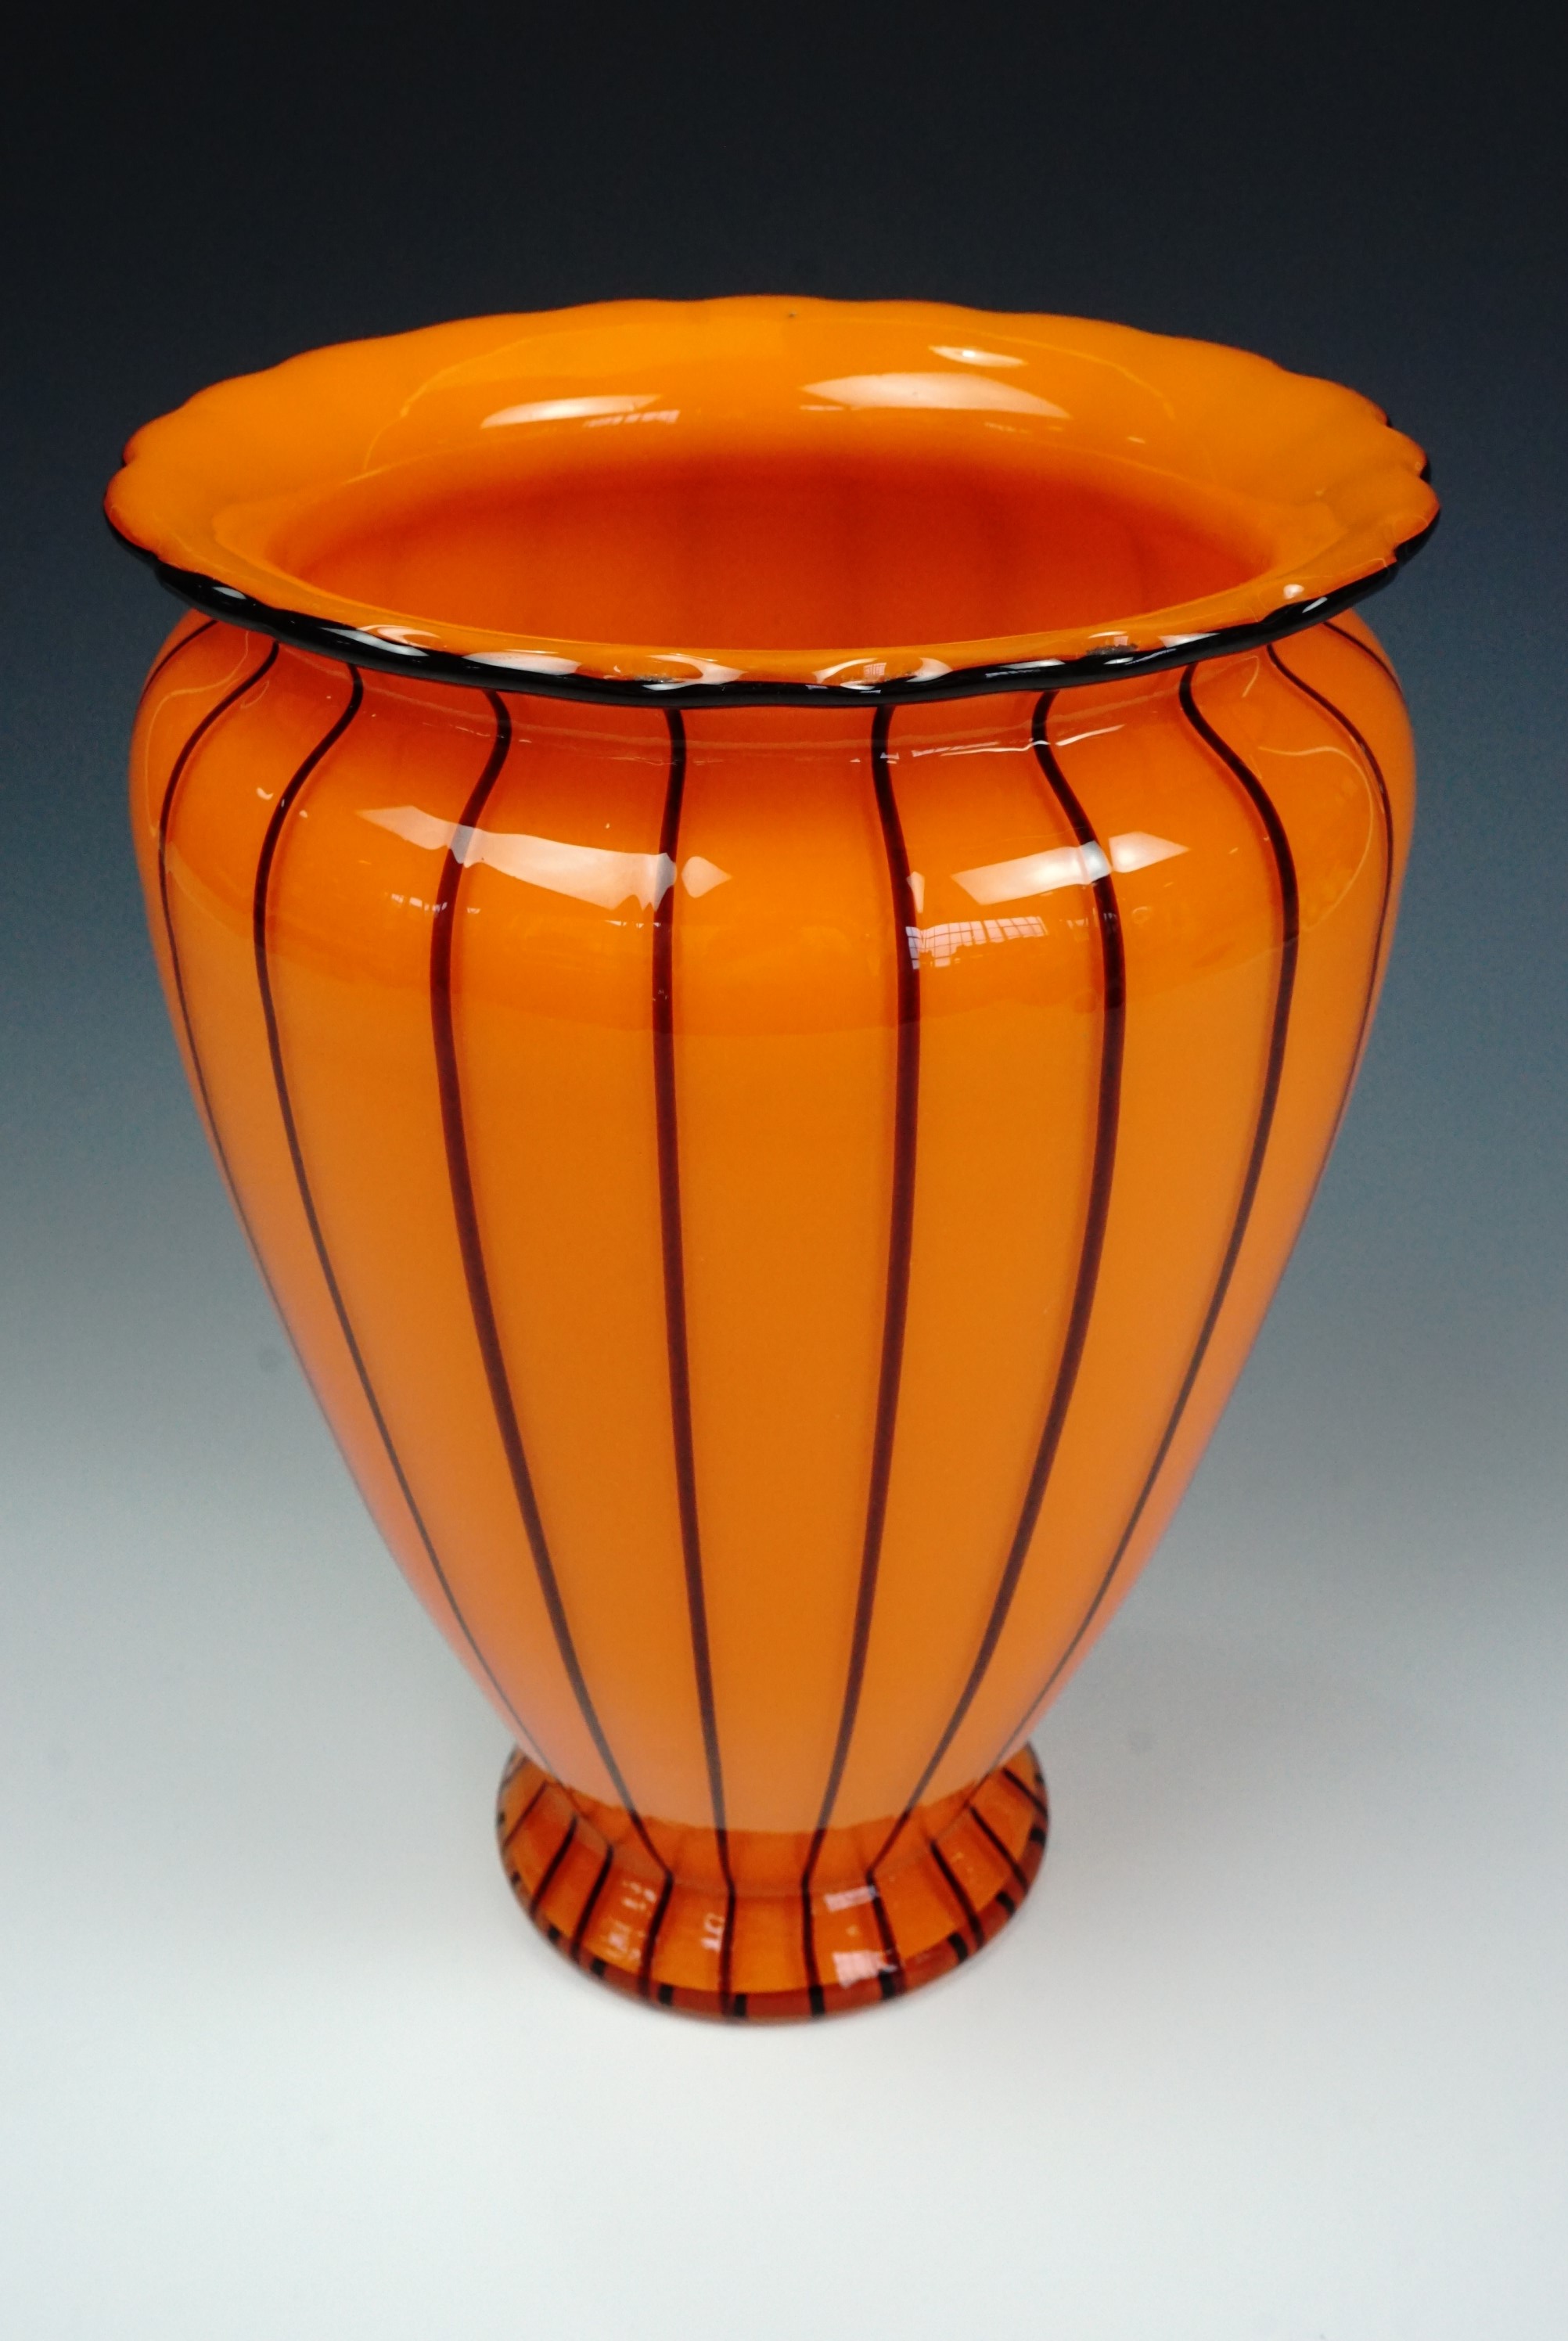 A Loetz "Tango" glass vase designed by Michael Powolny (1878-1954), of shouldered ovoid form with - Image 2 of 3